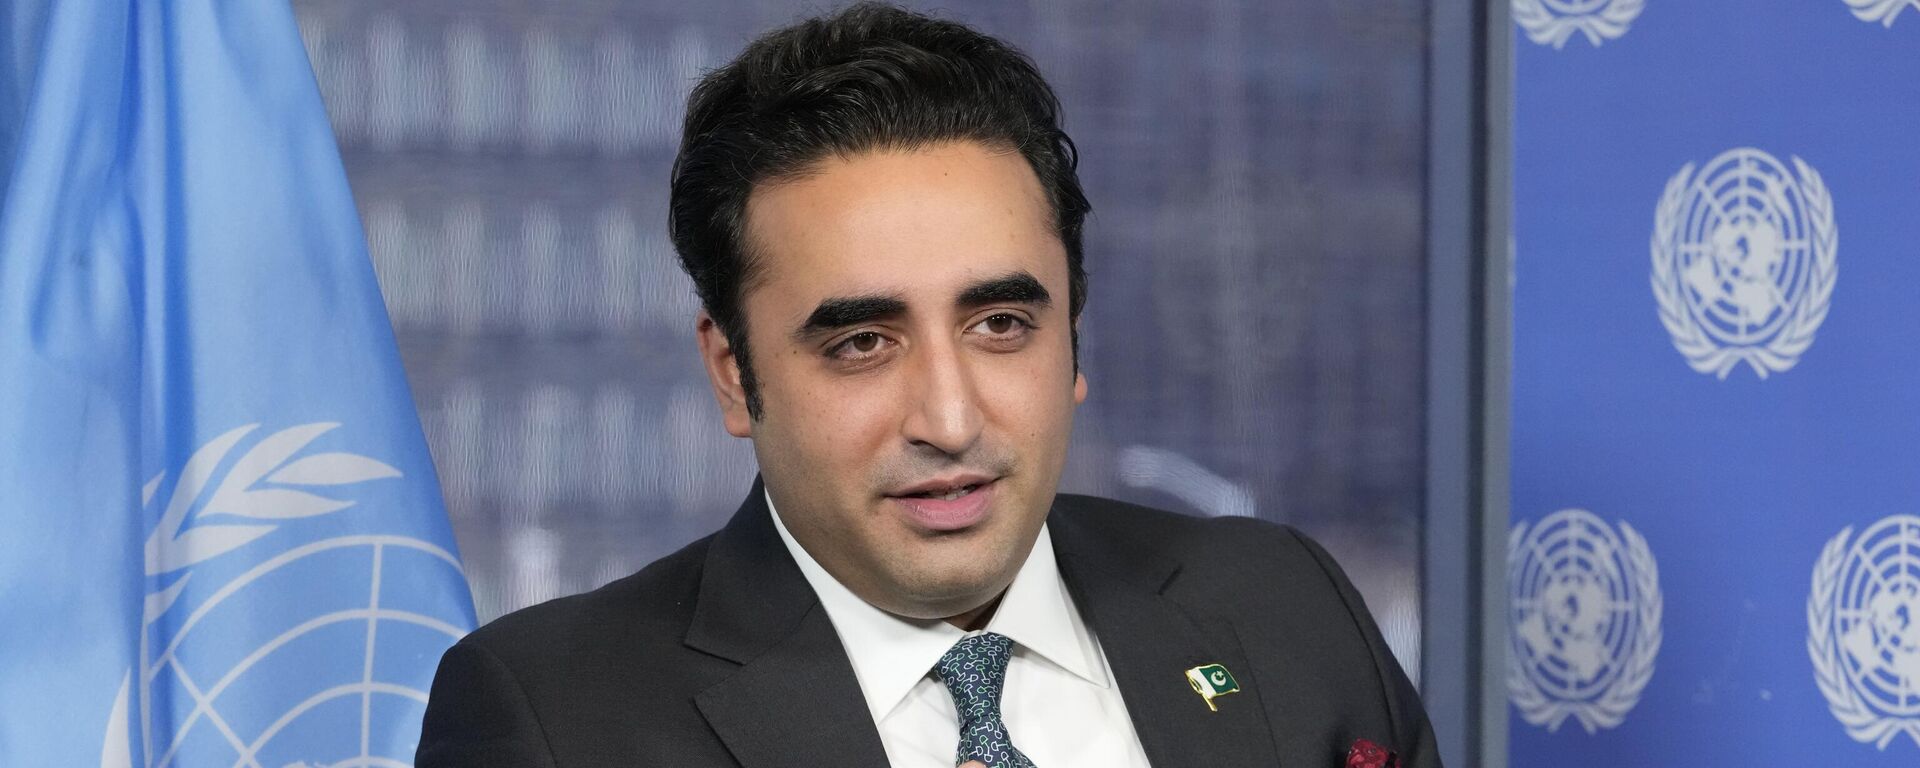 Pakistani Foreign Minister Bilawal Bhutto Zardari speaks during an interview with The Associated Press, Thursday, March 9, 2023 at United Nations headquarters. - Sputnik India, 1920, 20.04.2023